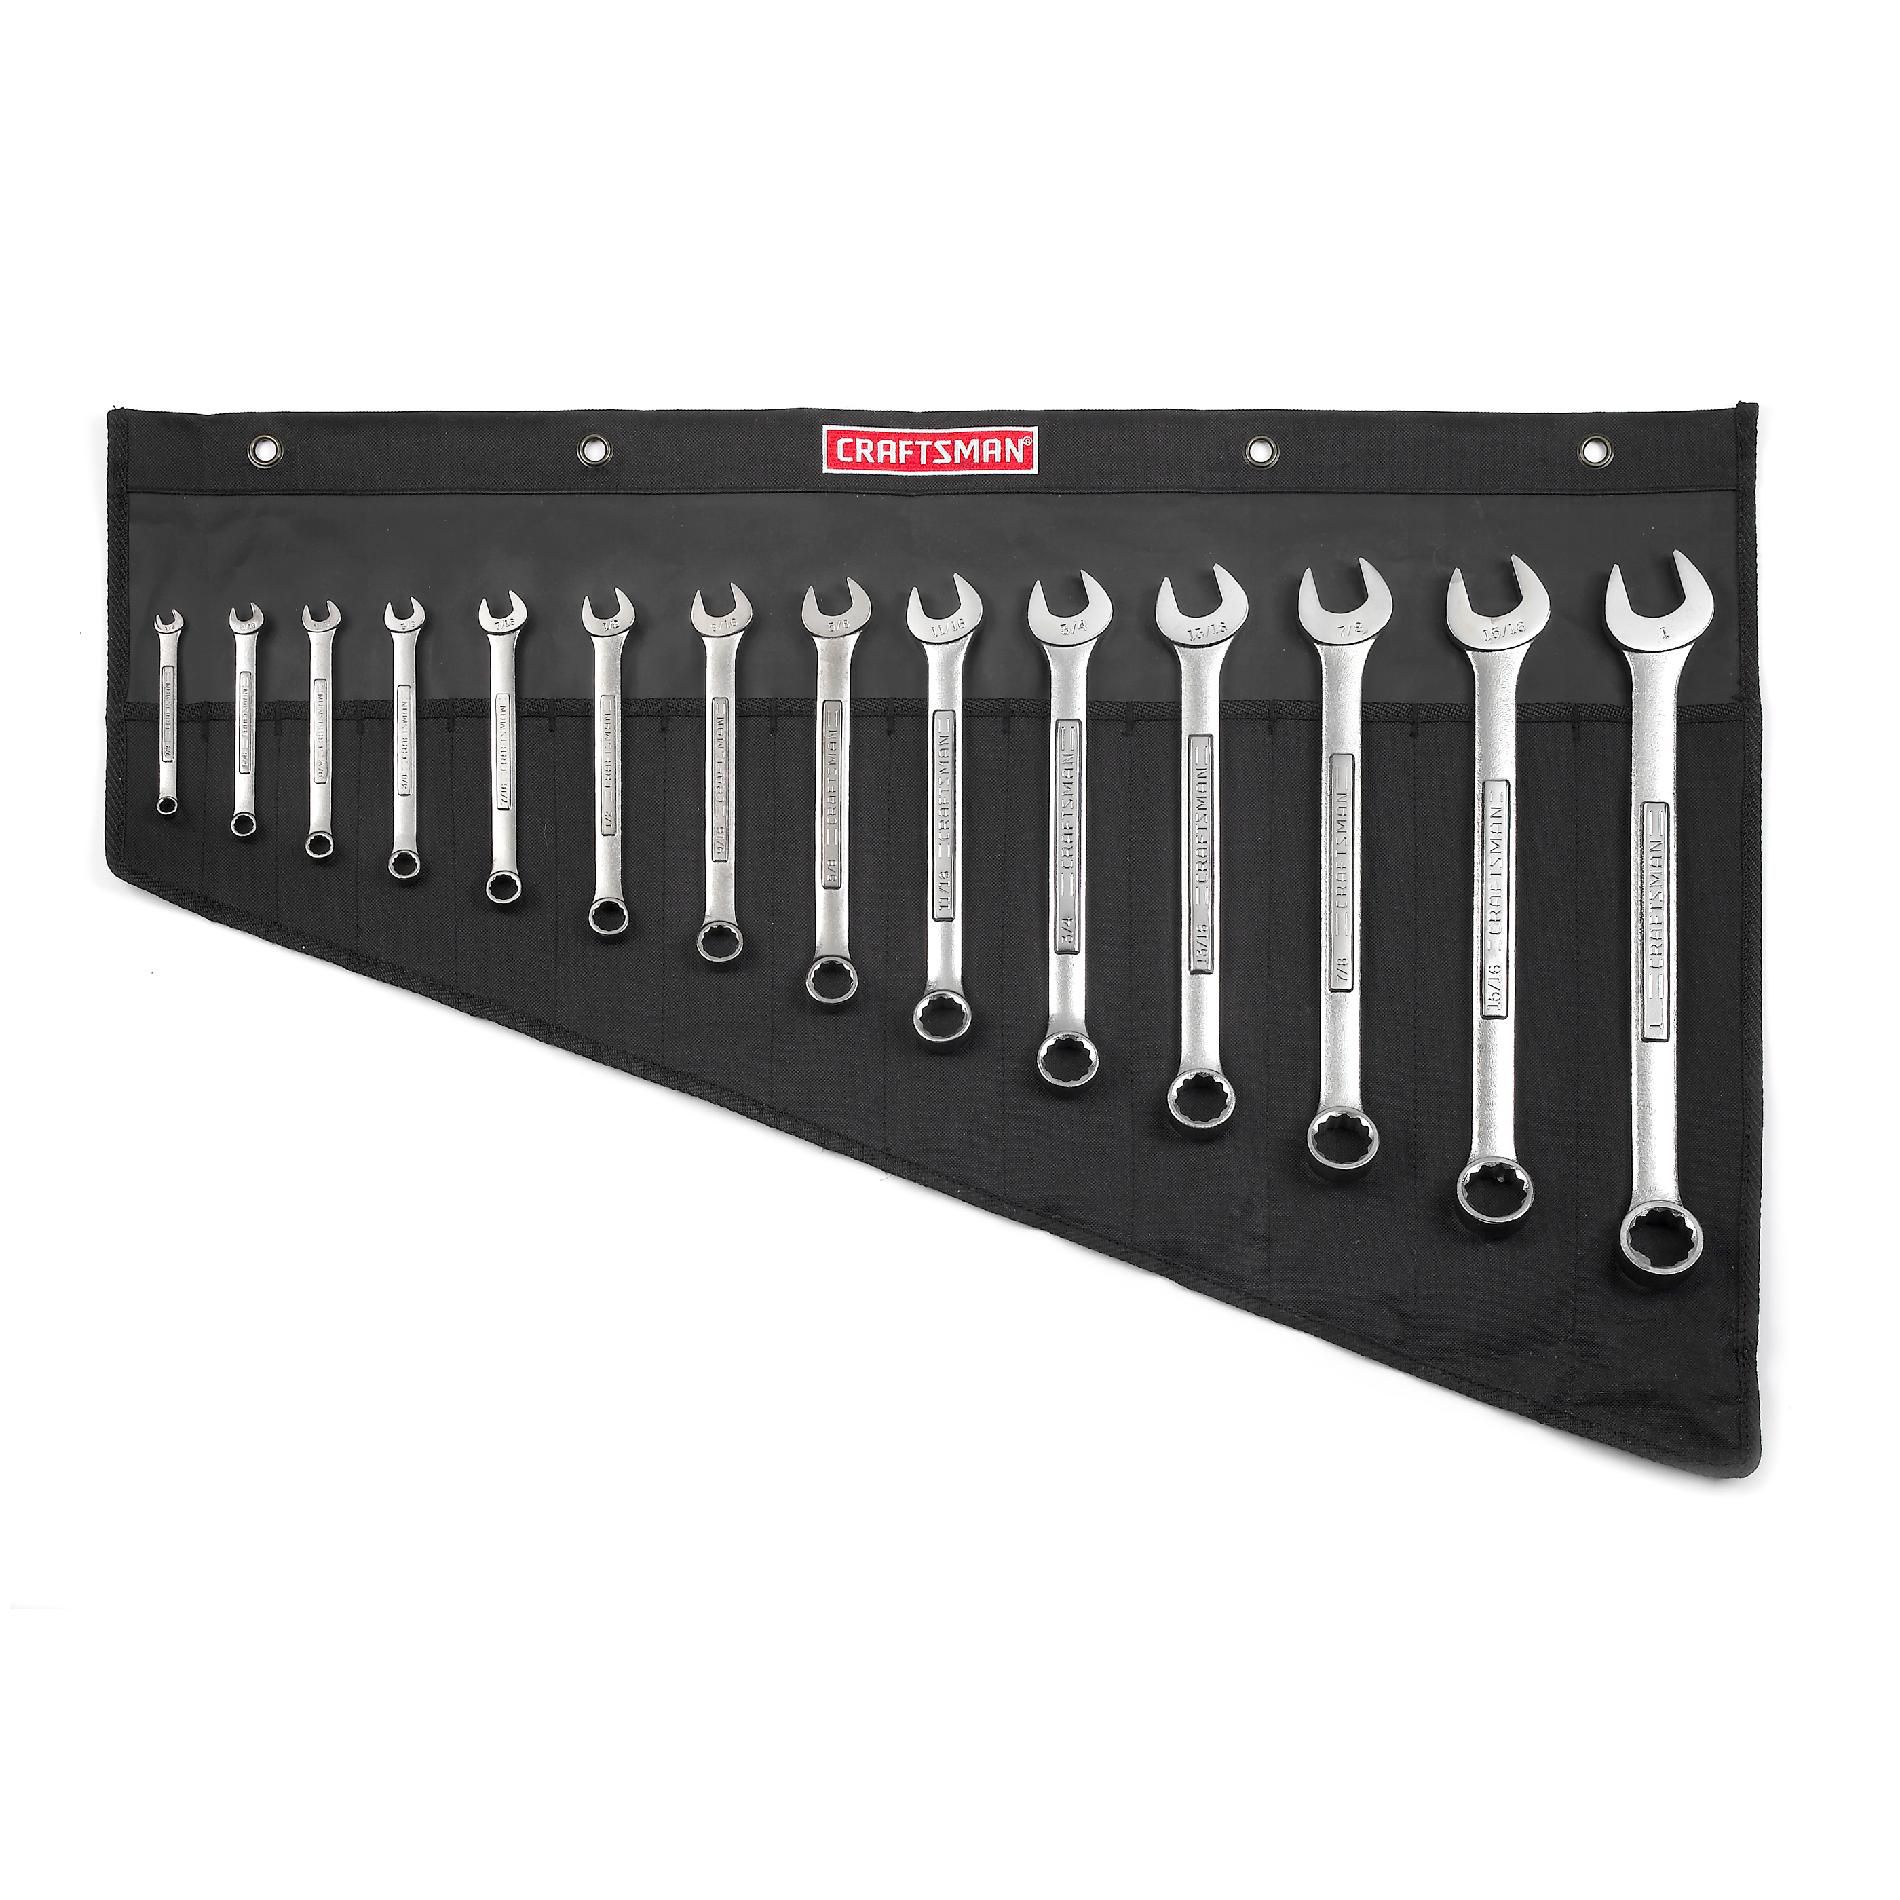 Craftsman 14 piece Inch Combination Wrench Set with Pouch